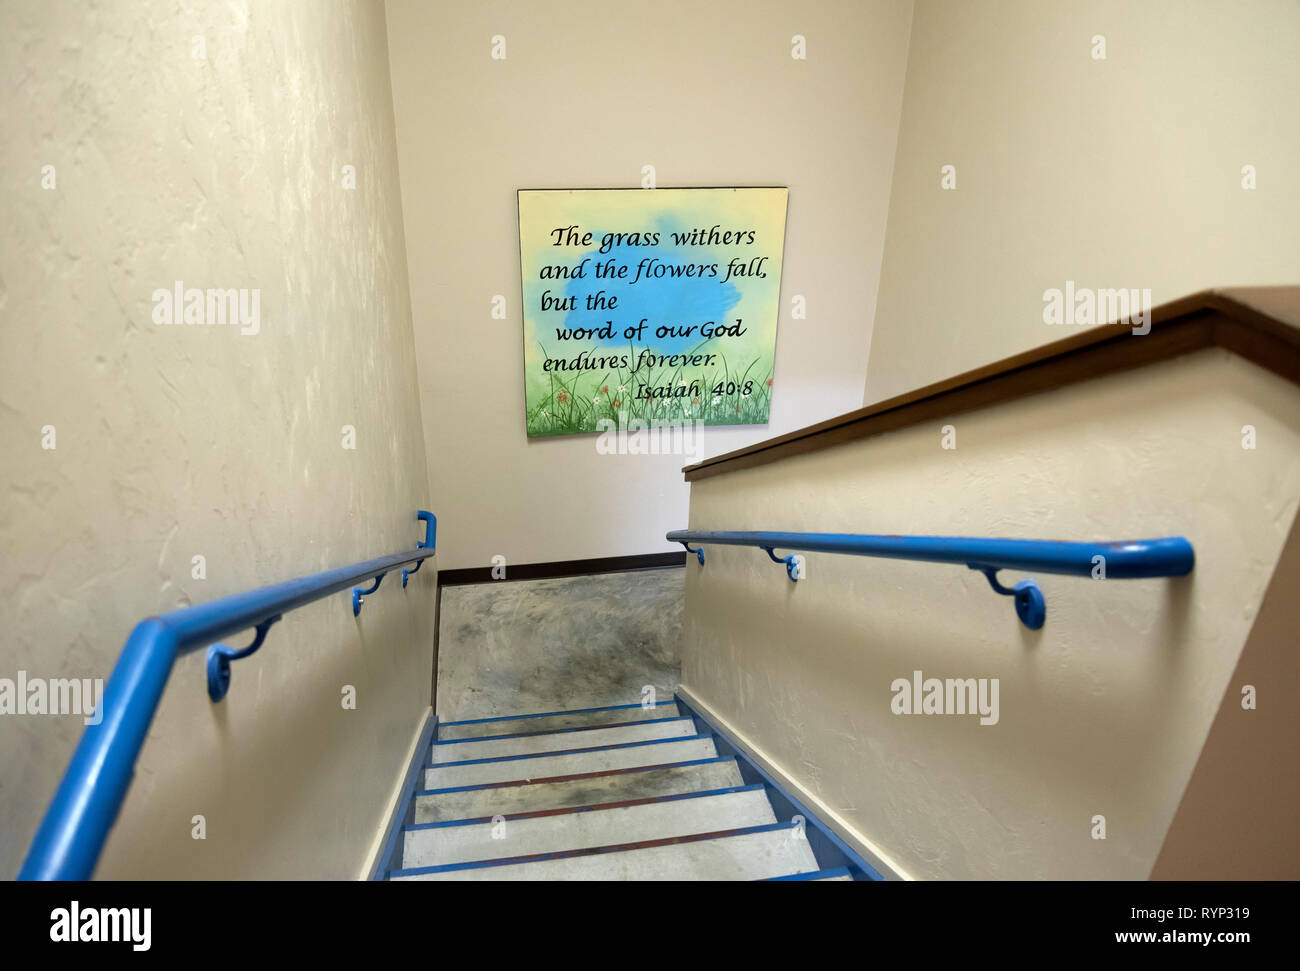 Church stairwell with a Bible verse from the Old Testament book of Isaiah  posted on wall. Stock Photo